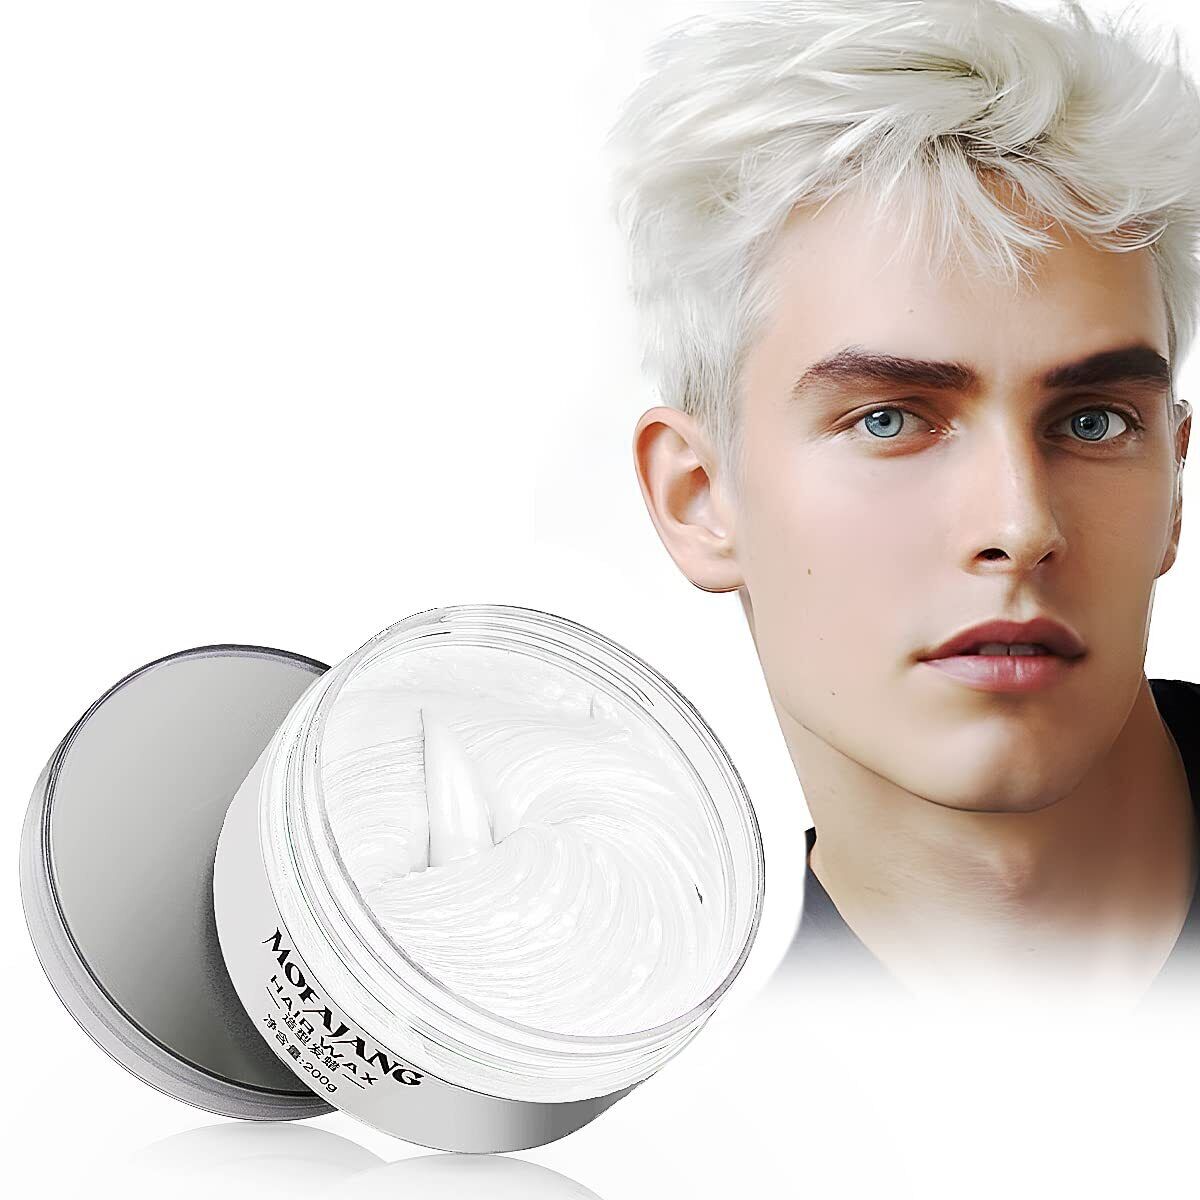 White Hair Color Wax Pomades  oz Natural Hair Coloring Wax Material  Party | eBay